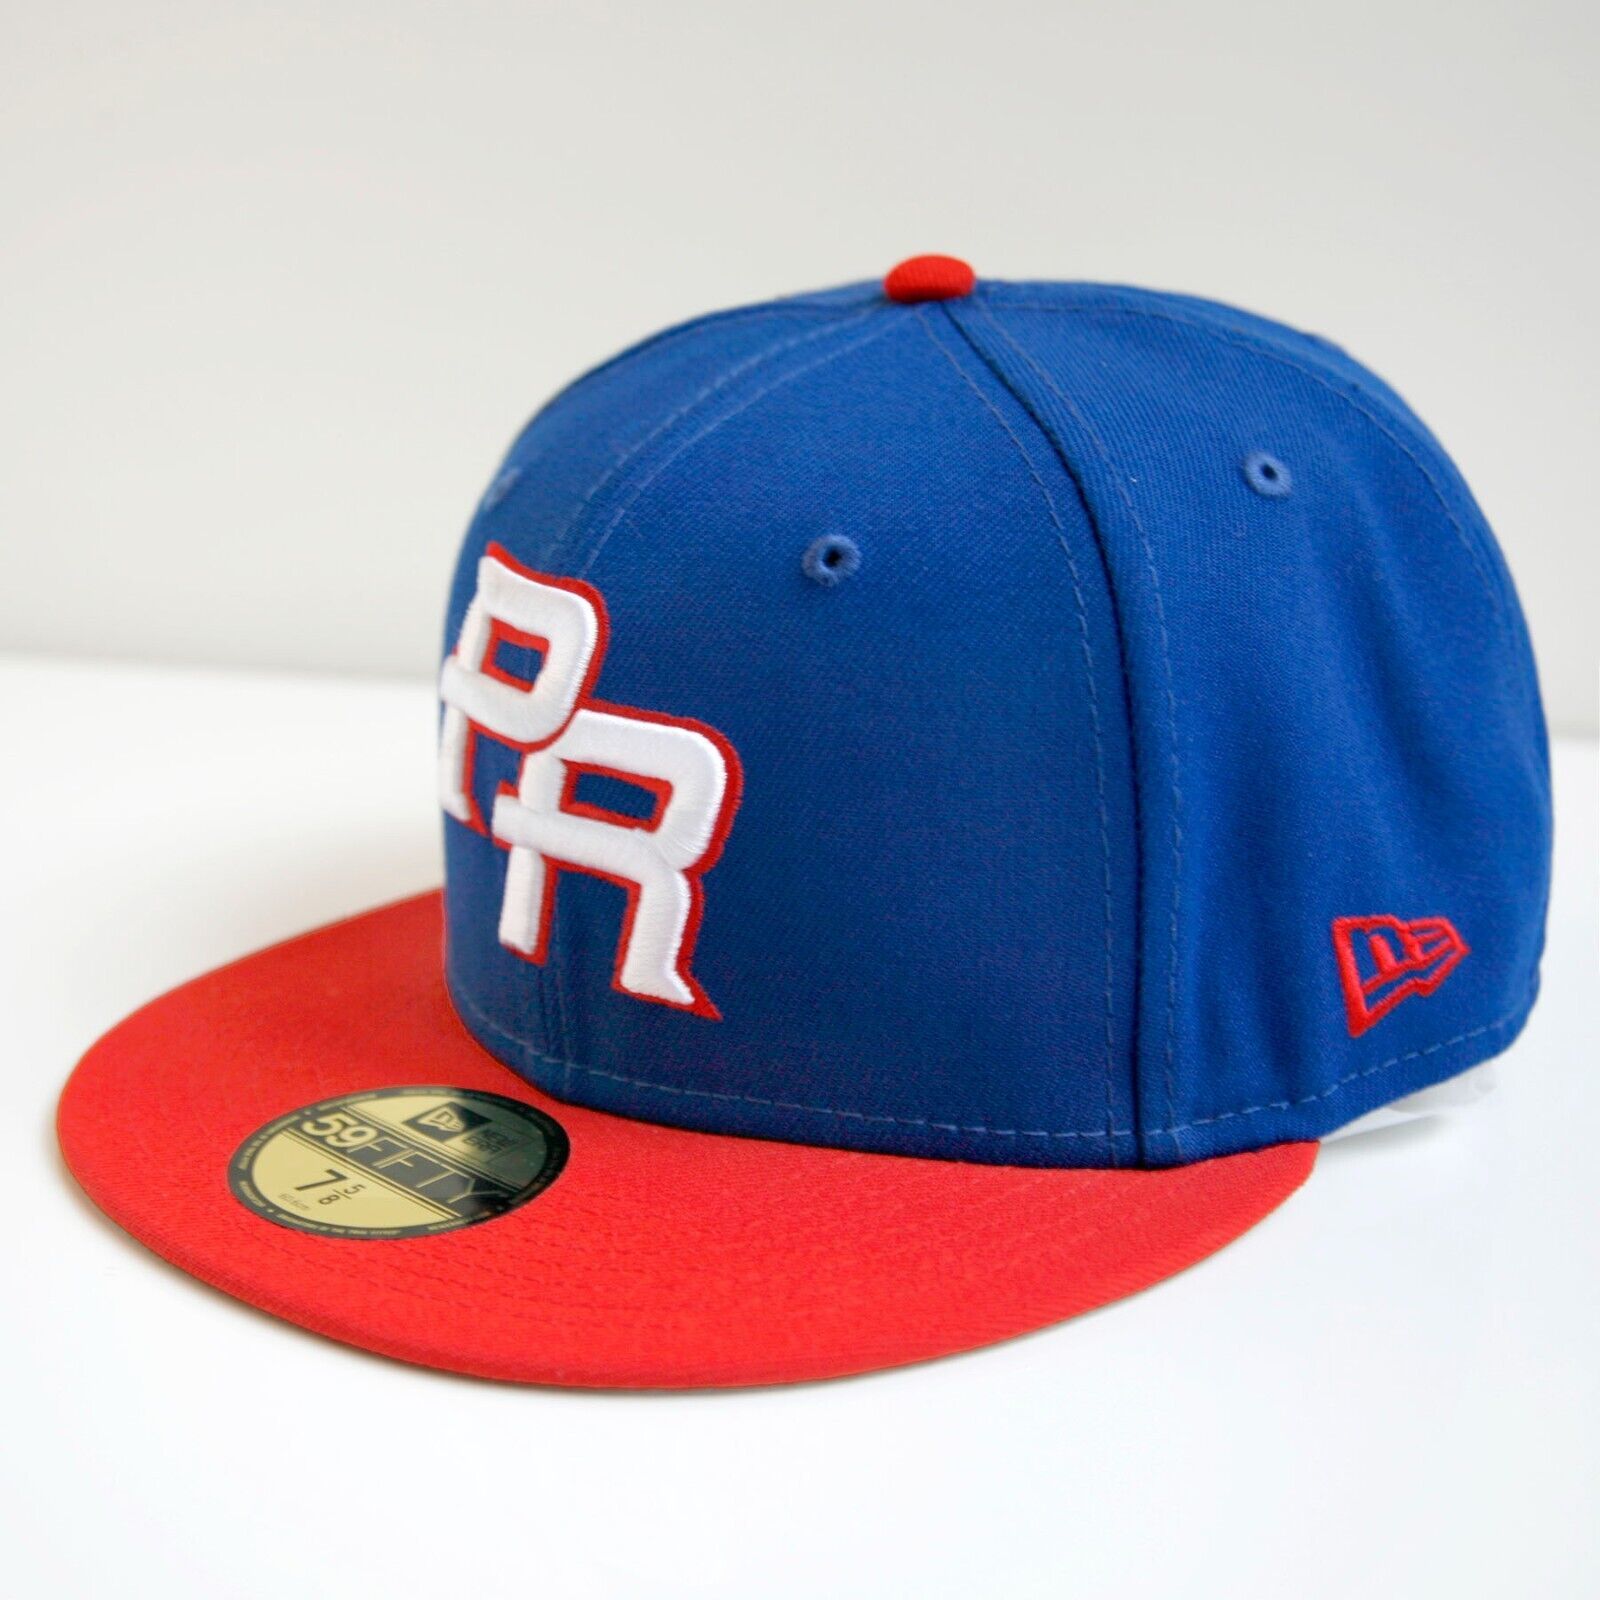 Primary image for New Era 59Fifty Puerto Rico Men's Fitted Cap Blue World Baseball Classic